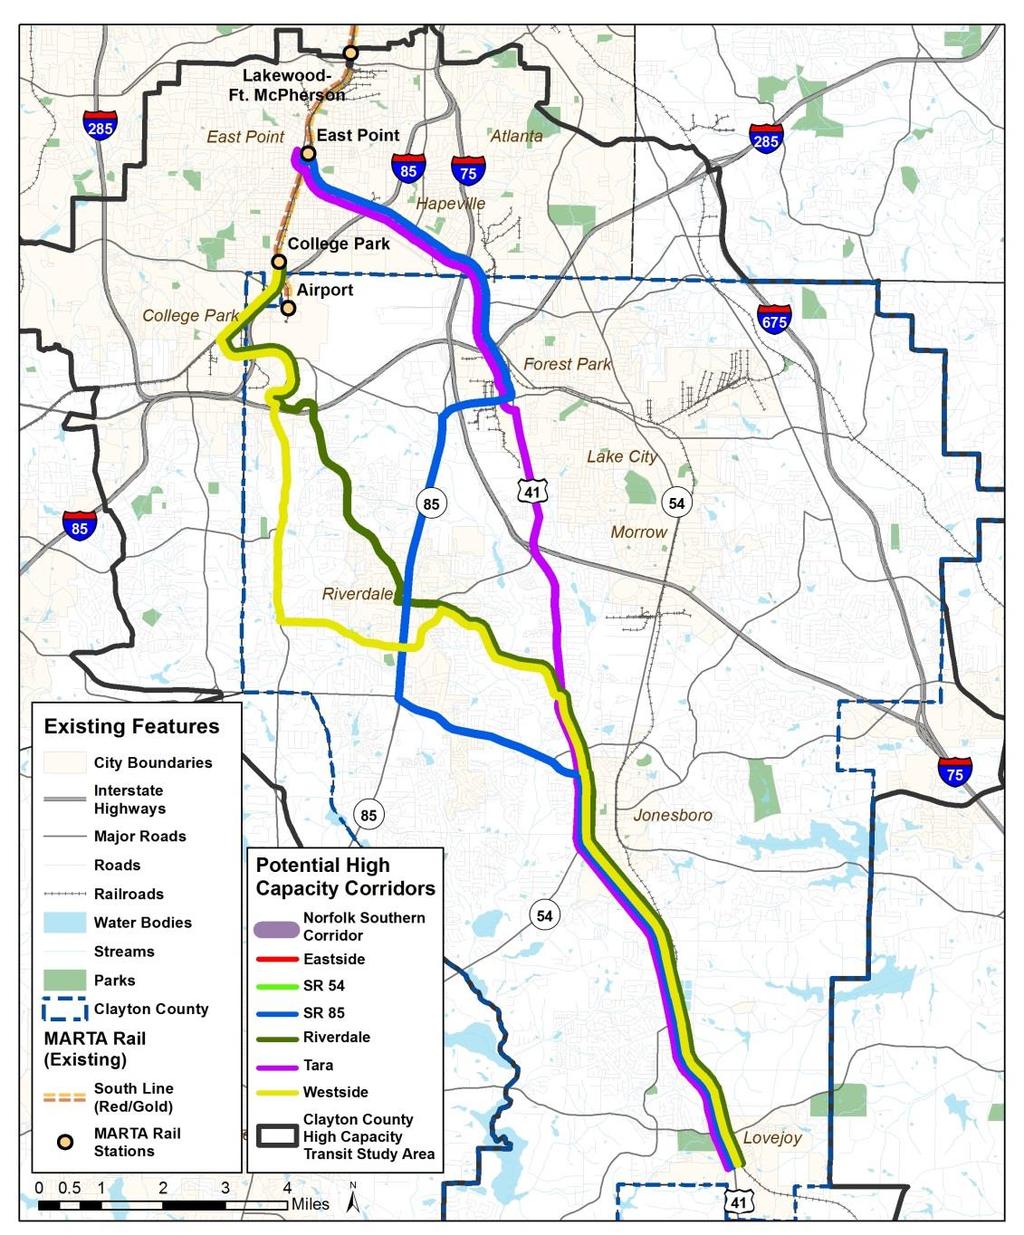 CLAYTON COUNTY TRANSIT CORRIDORS High capacity transit corridors identified in previous planning efforts Enhanced transit connectivity from MARTA Rail to Clayton County Determine